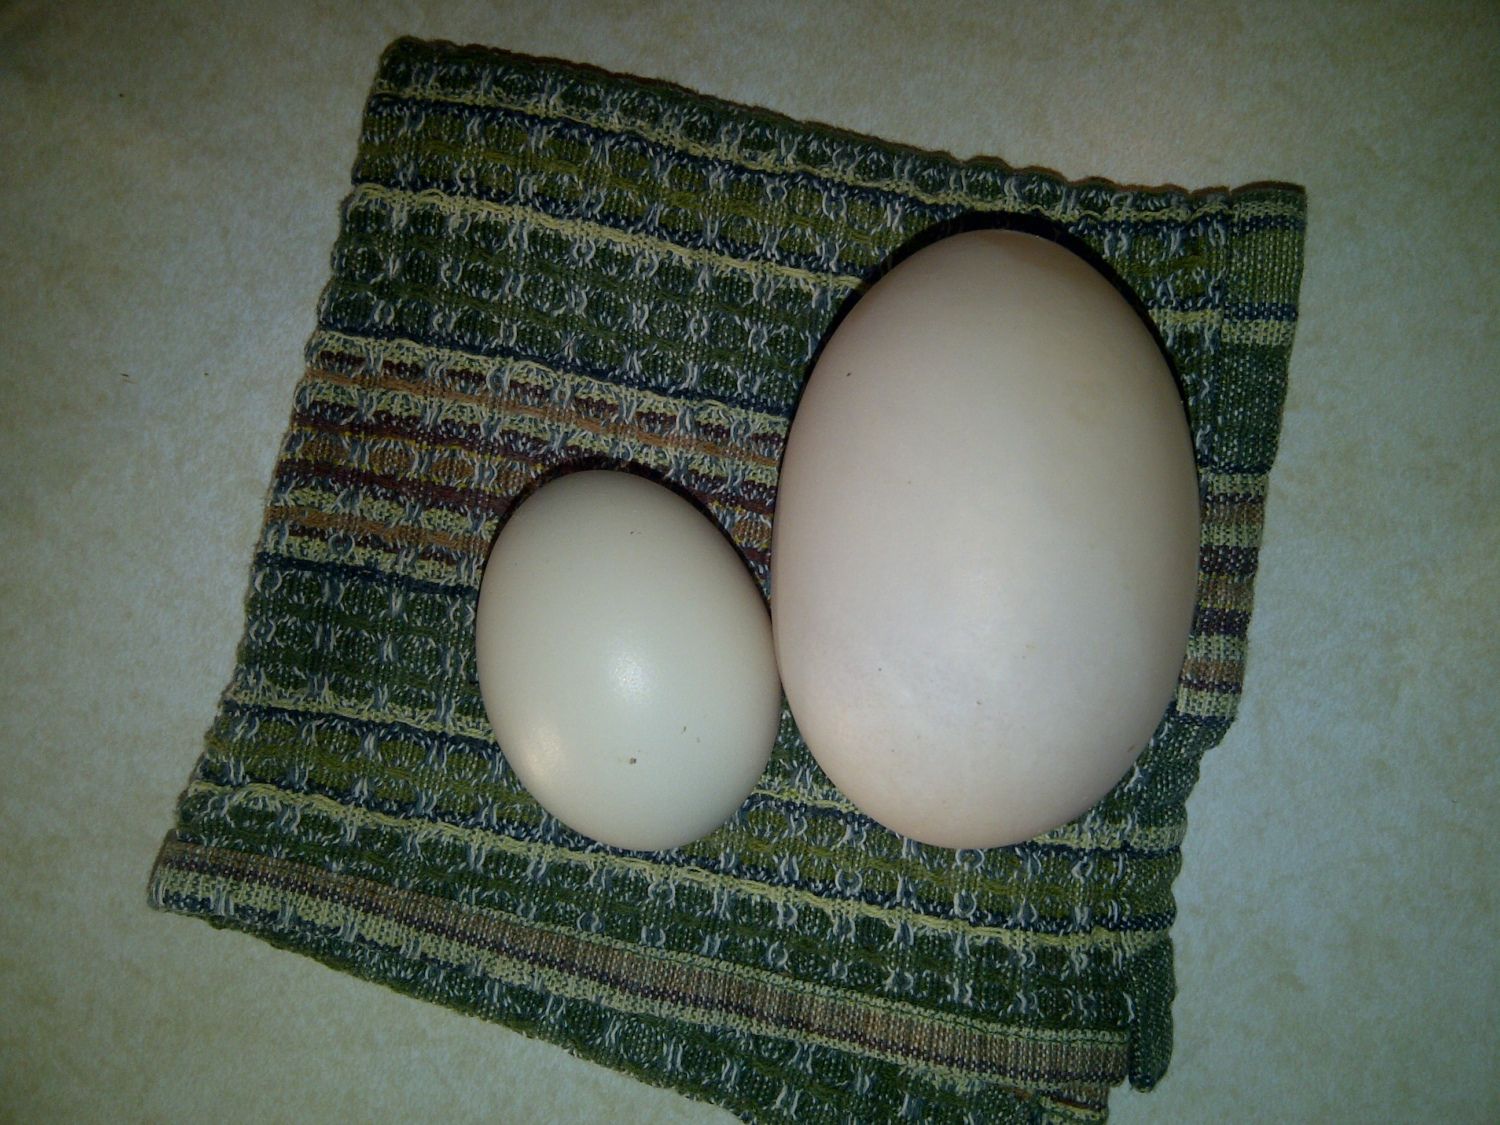 Complained that Jersey Giant eggs were too small. No more